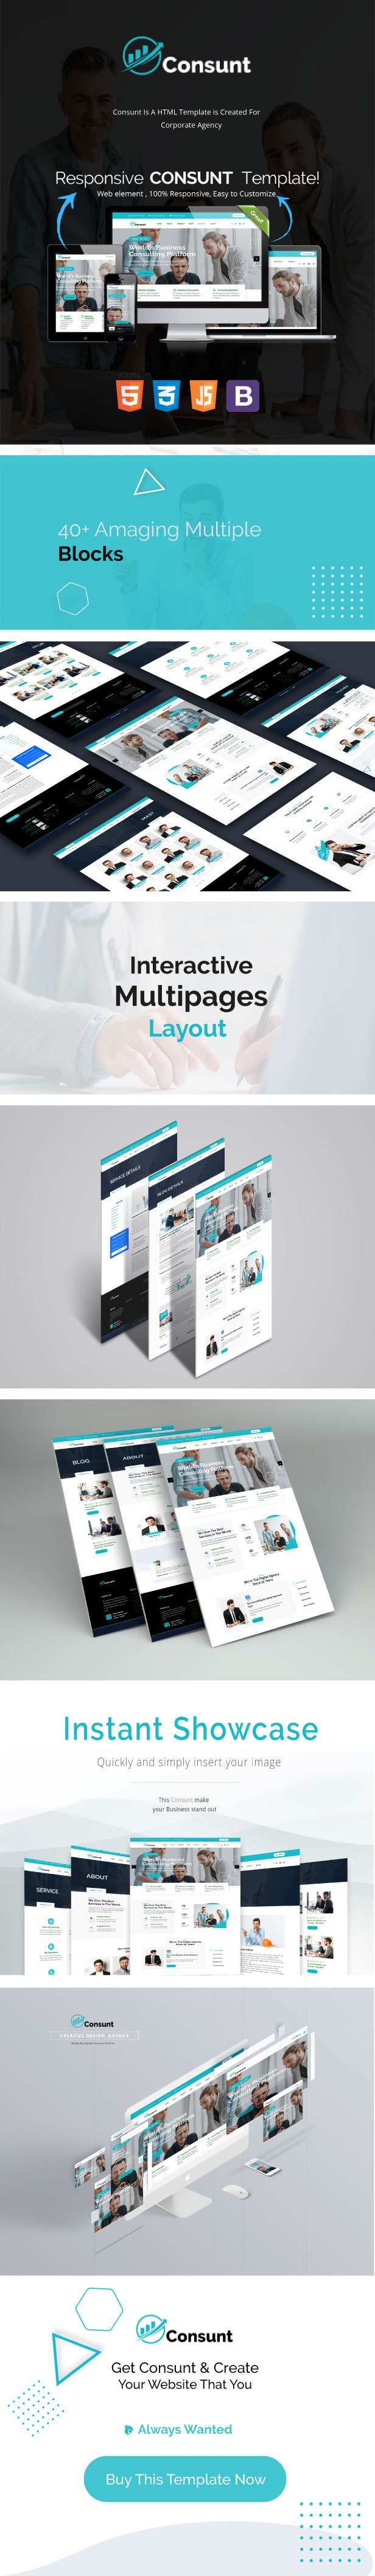 Consunt - Finance & Consulting HTML Template - 1